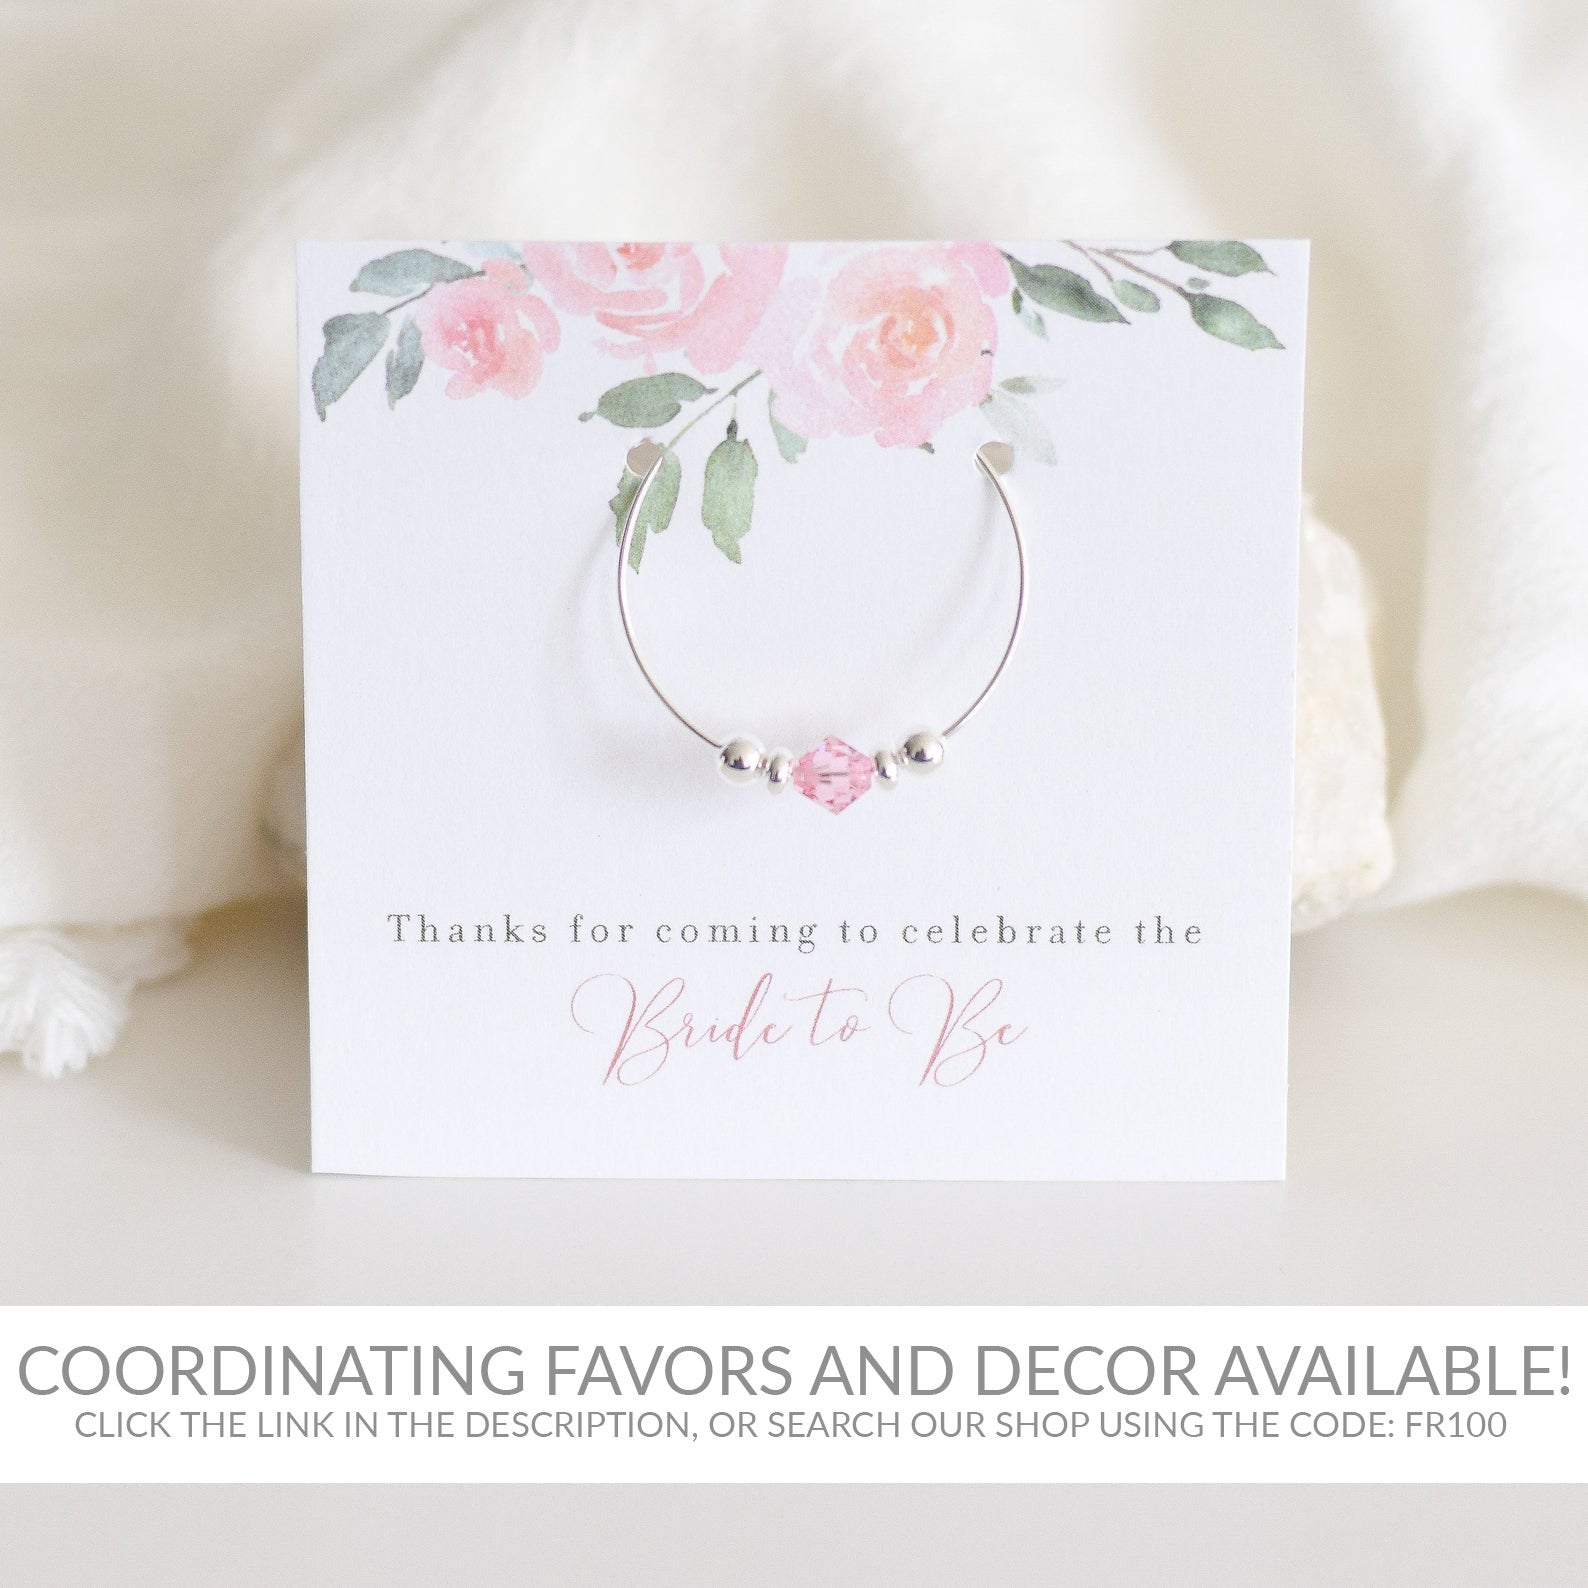 Blush Pink Floral Cards and Gifts Printable Sign INSTANT DOWNLOAD, Bridal Shower, Baby Shower, Wedding Decorations and Supplies - FR100 - @PlumPolkaDot 